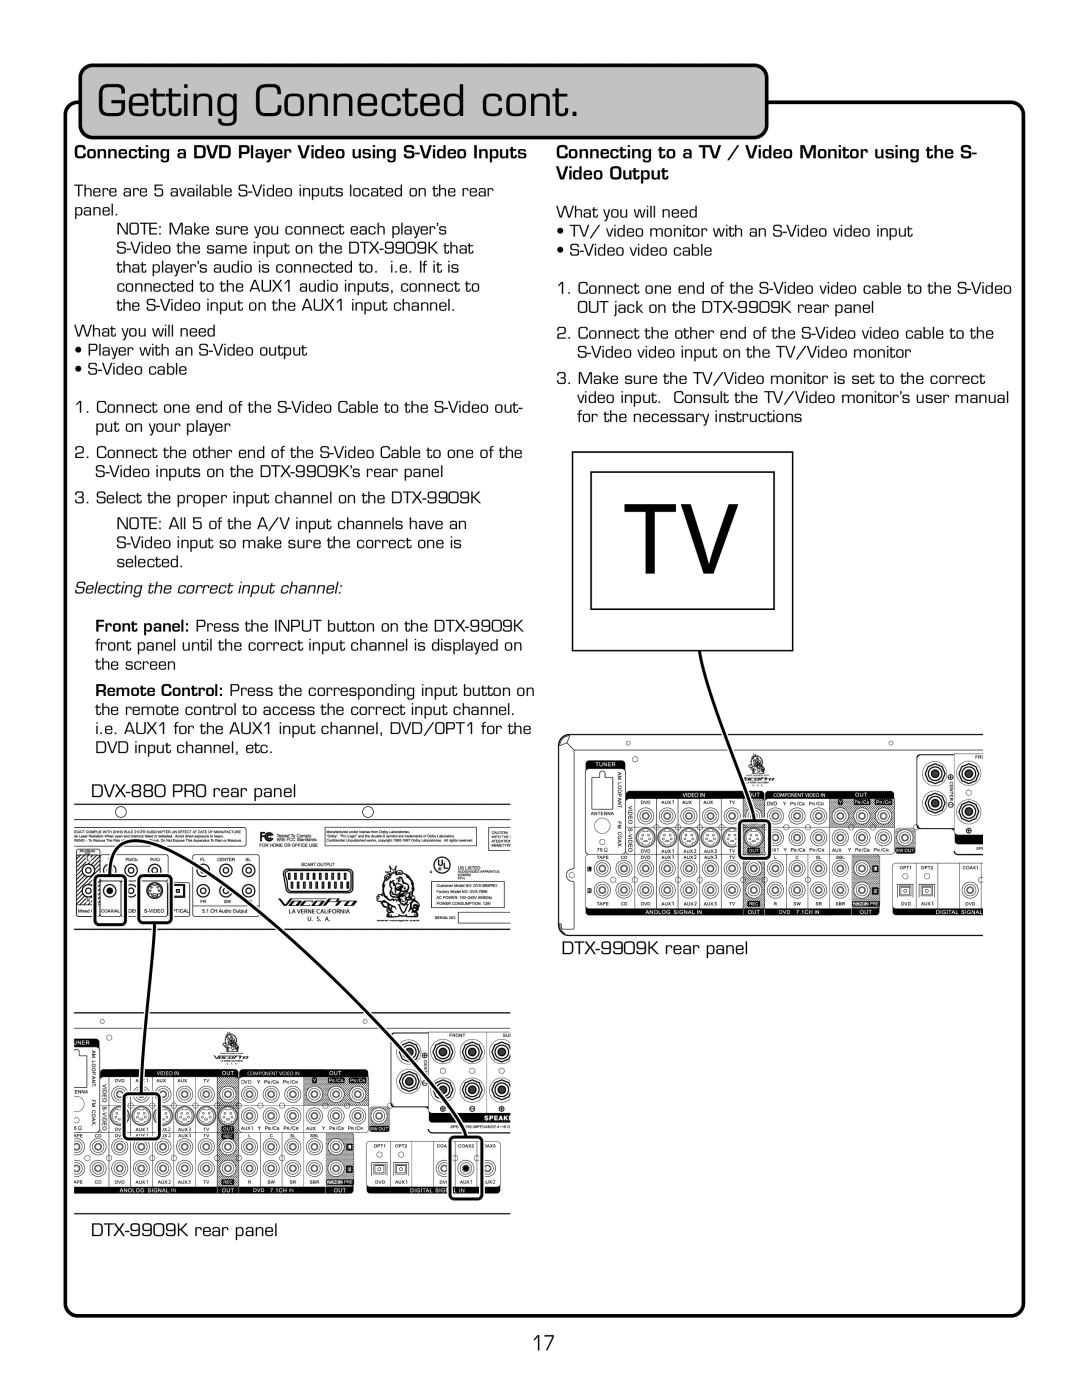 VocoPro DTX-9909K owner manual Getting Connected cont, Connecting a DVD Player Video using S-VideoInputs 